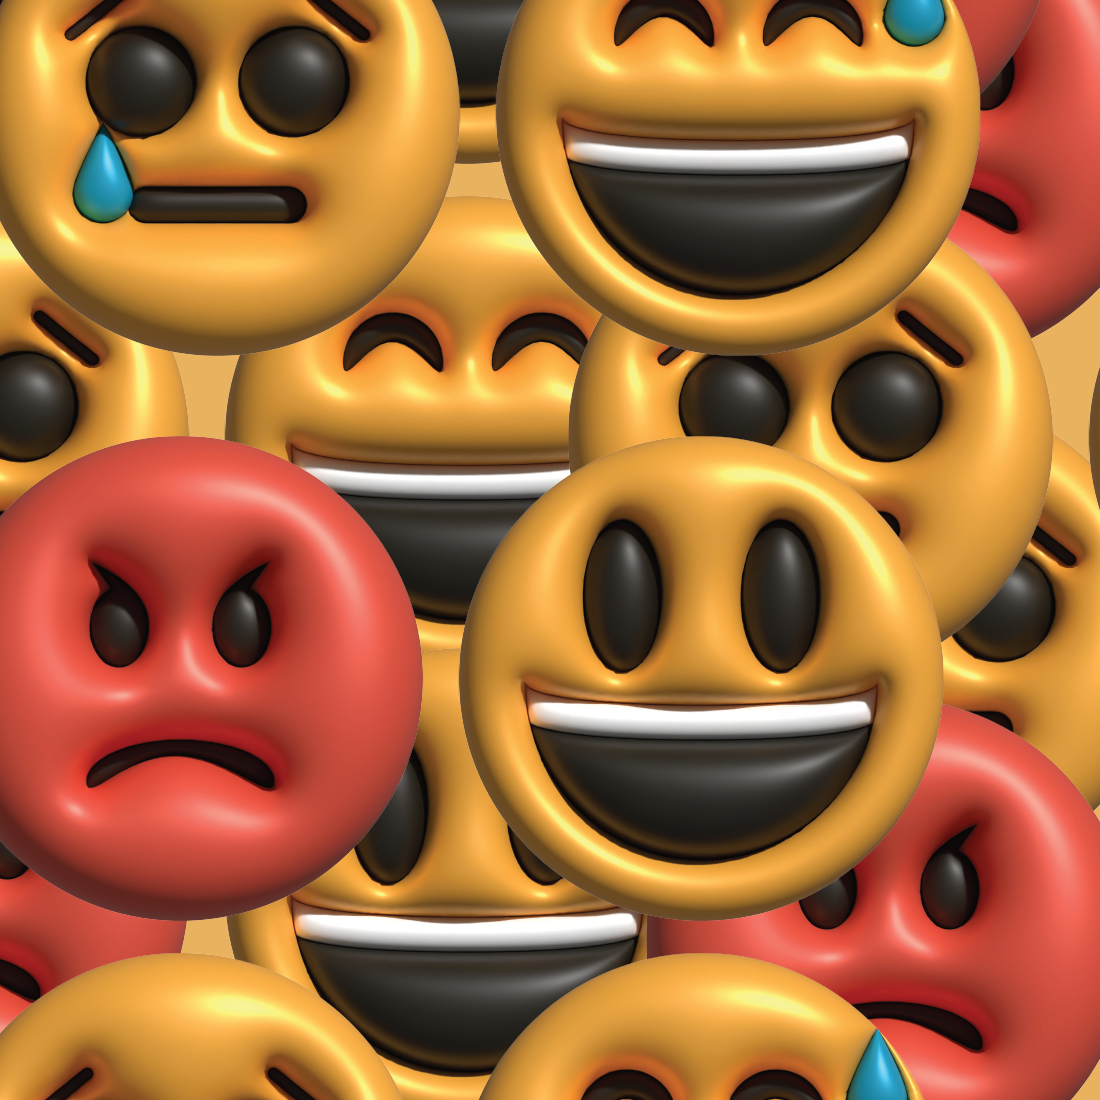 Bunch of different colored smiley faces.